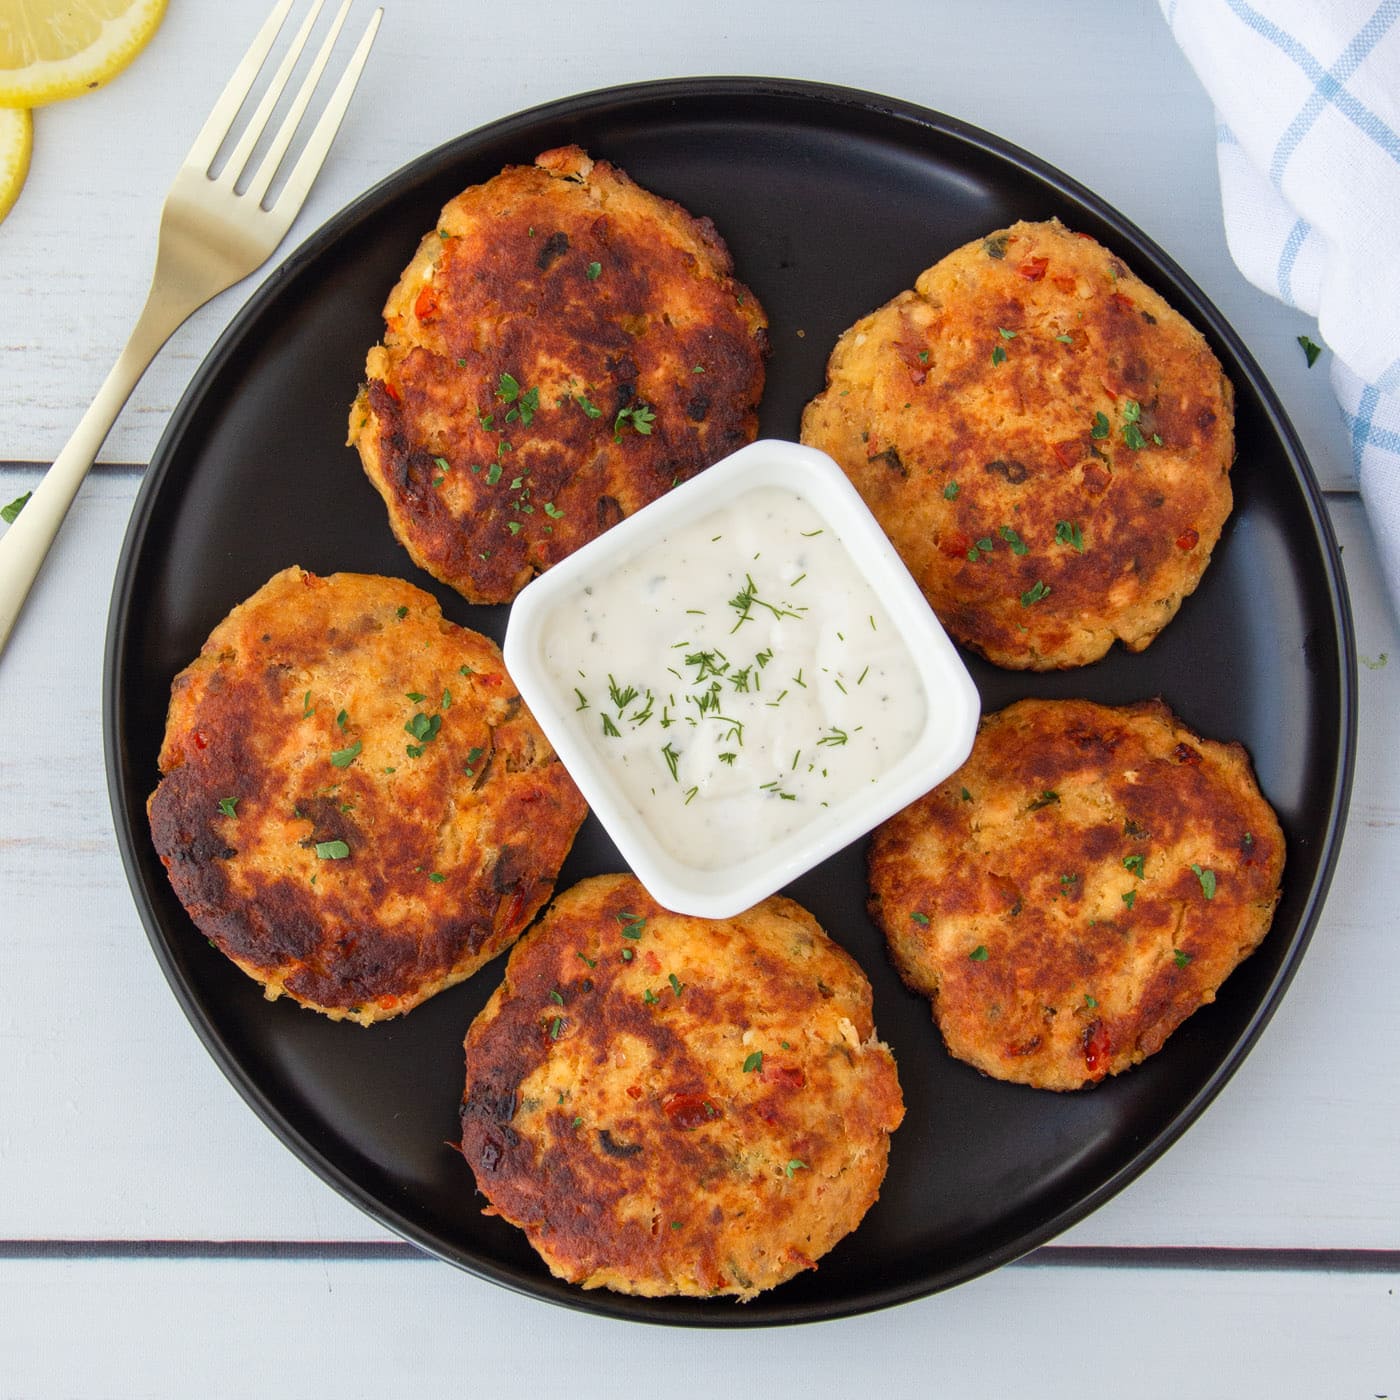 Thomasina Miers' recipe for fish cakes with wild garlic messine | Food |  The Guardian